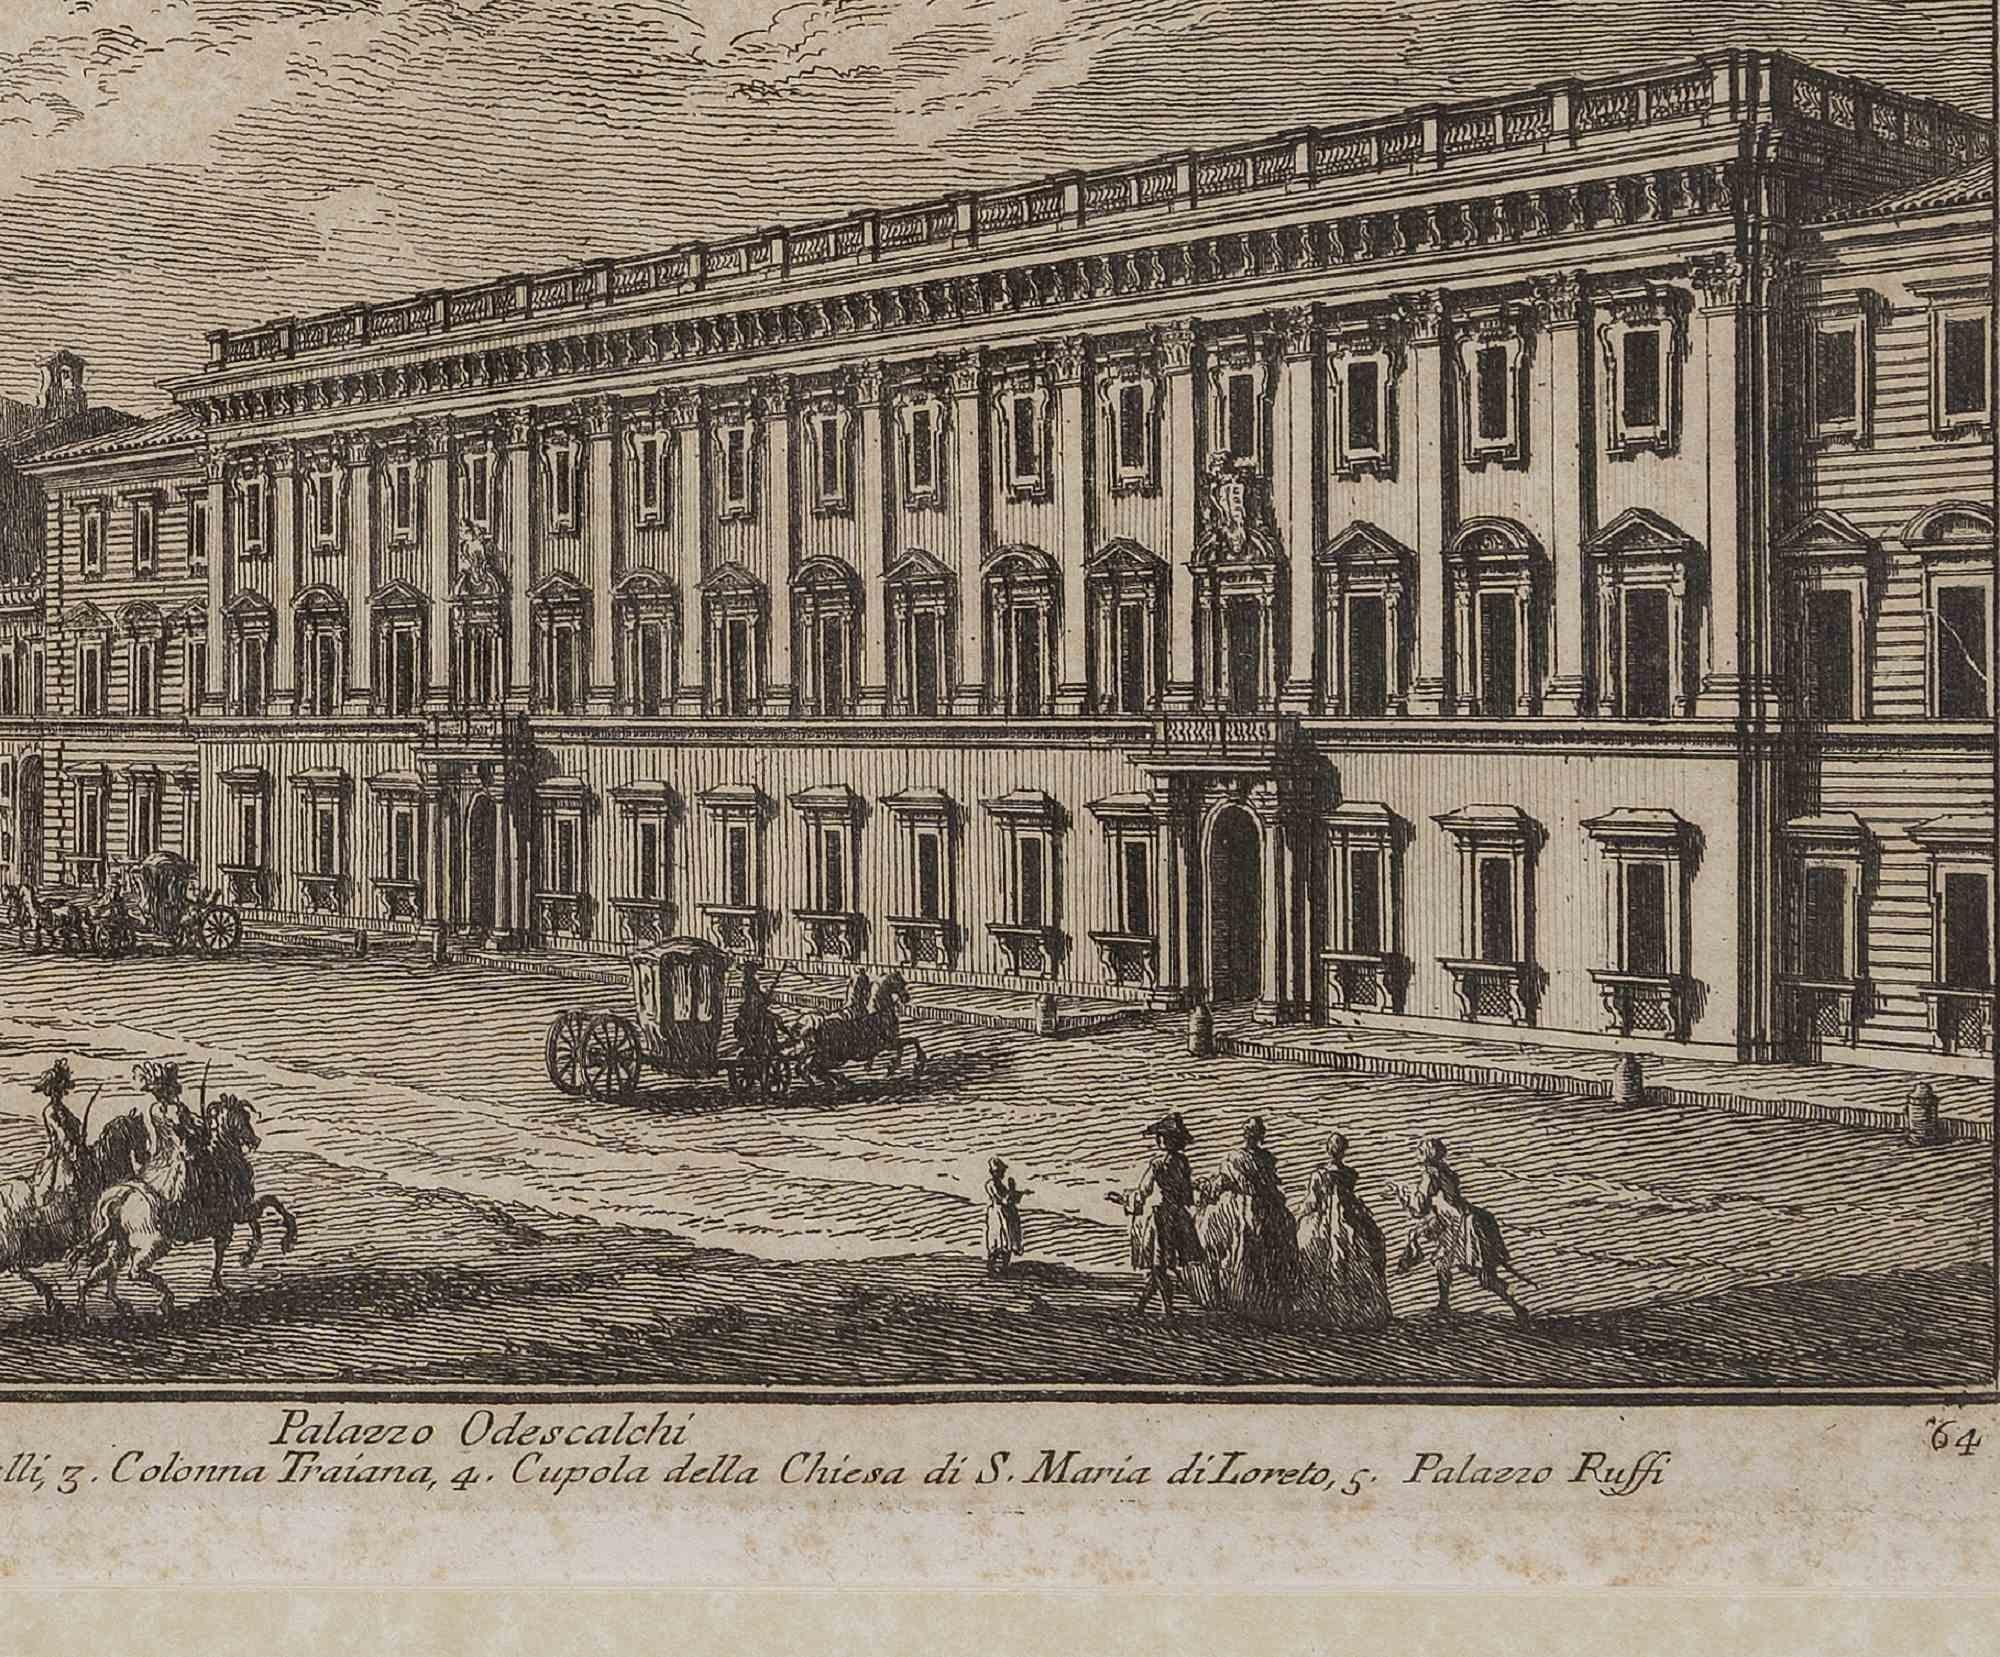 Palazzo Odescalchi is original black and white etching realized by Giuseppe Vasi in 1754

Beautiful etching representing Palazzo Odescalchi in Rome.

Signed and titled on plate lower margin.

Mint condition due to the aged.

Includes frame 39 x 50.5